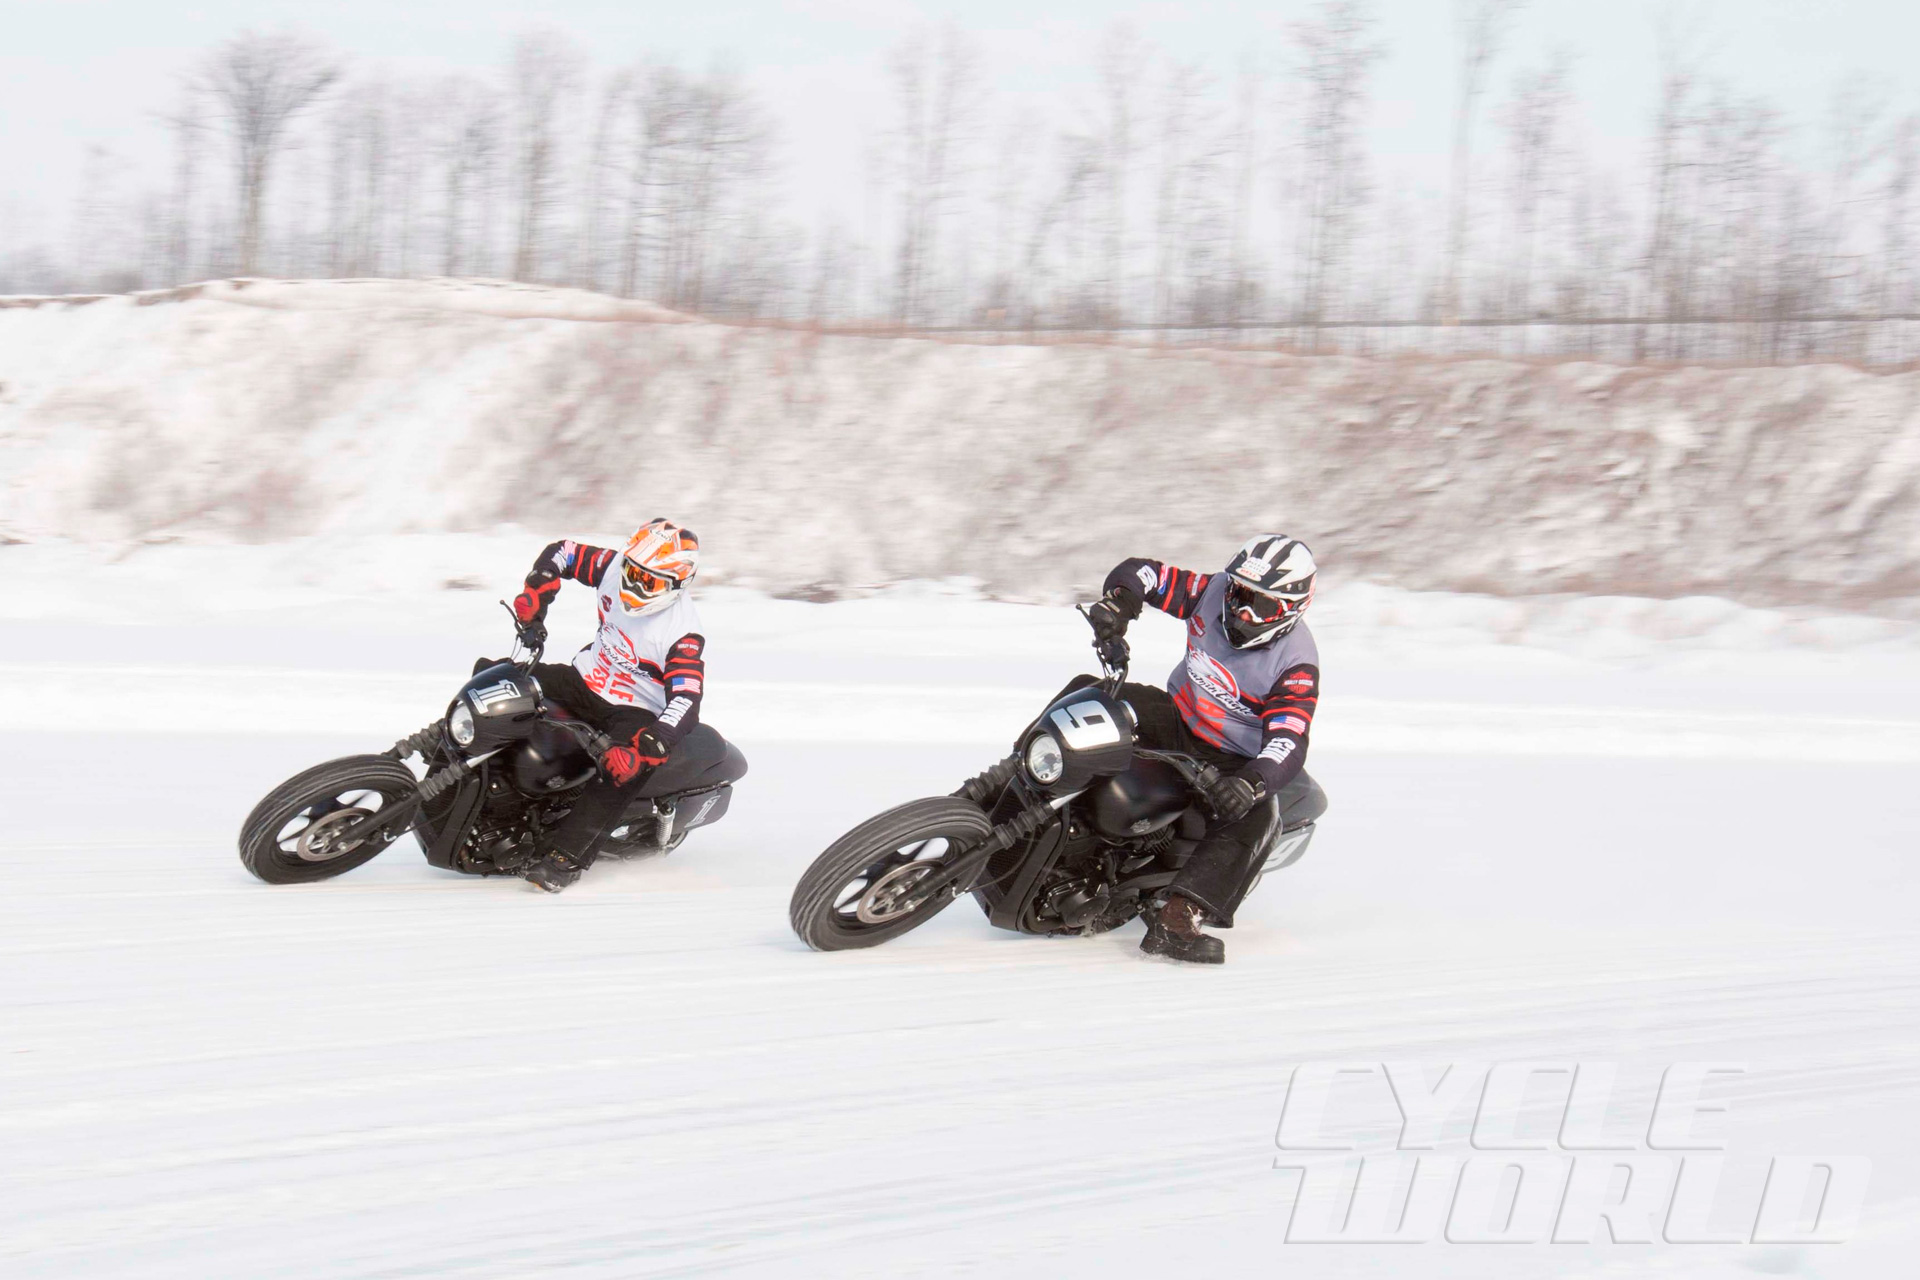 Brad Baker Bully On Winter X Games Motorcycle Ice Racing Cycle World